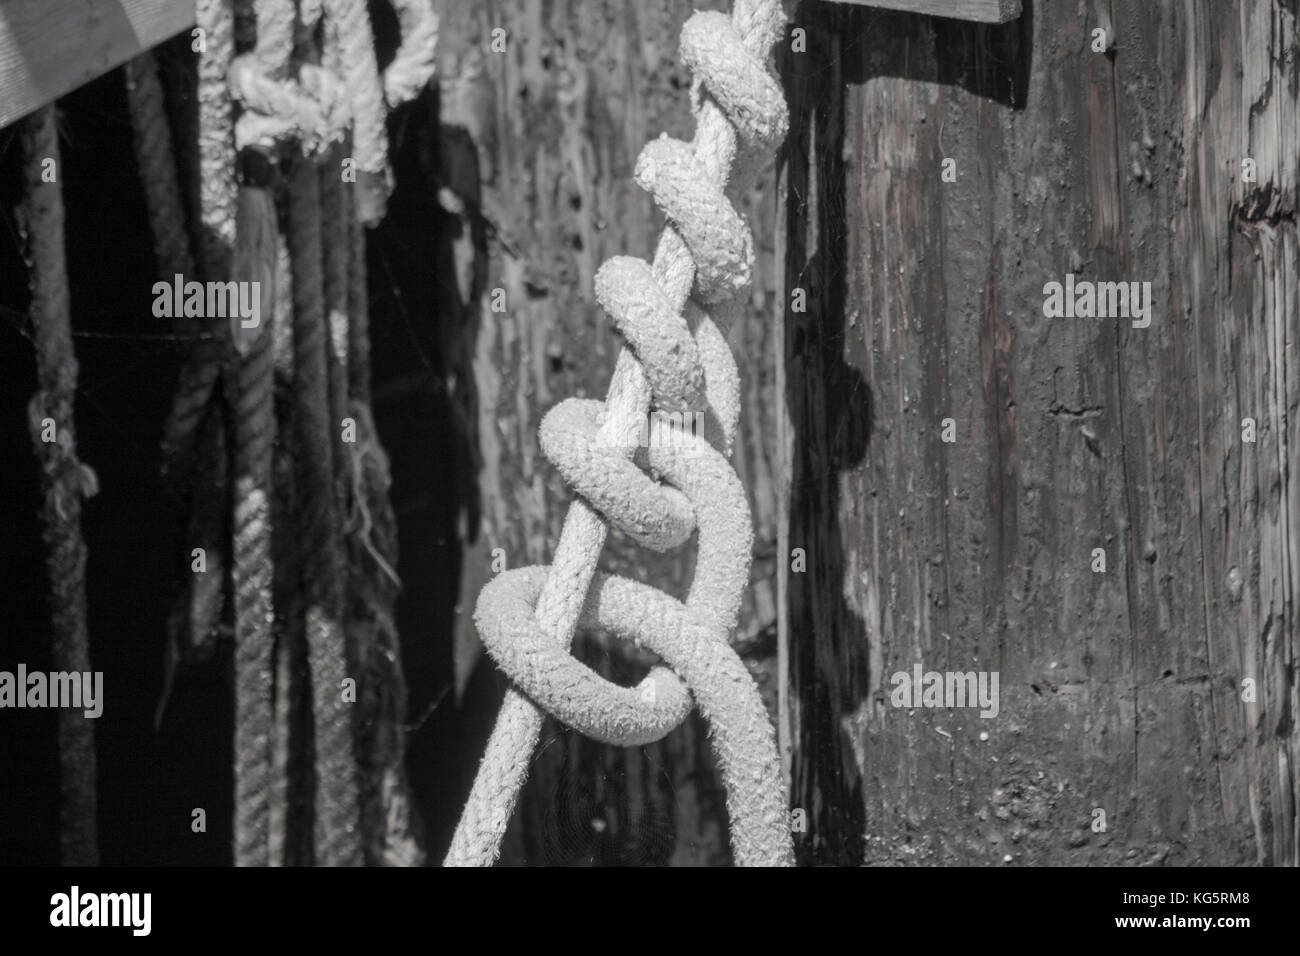 Knots in a rope found at Old Fisherman's Wharf in Monterey, California Stock Photo